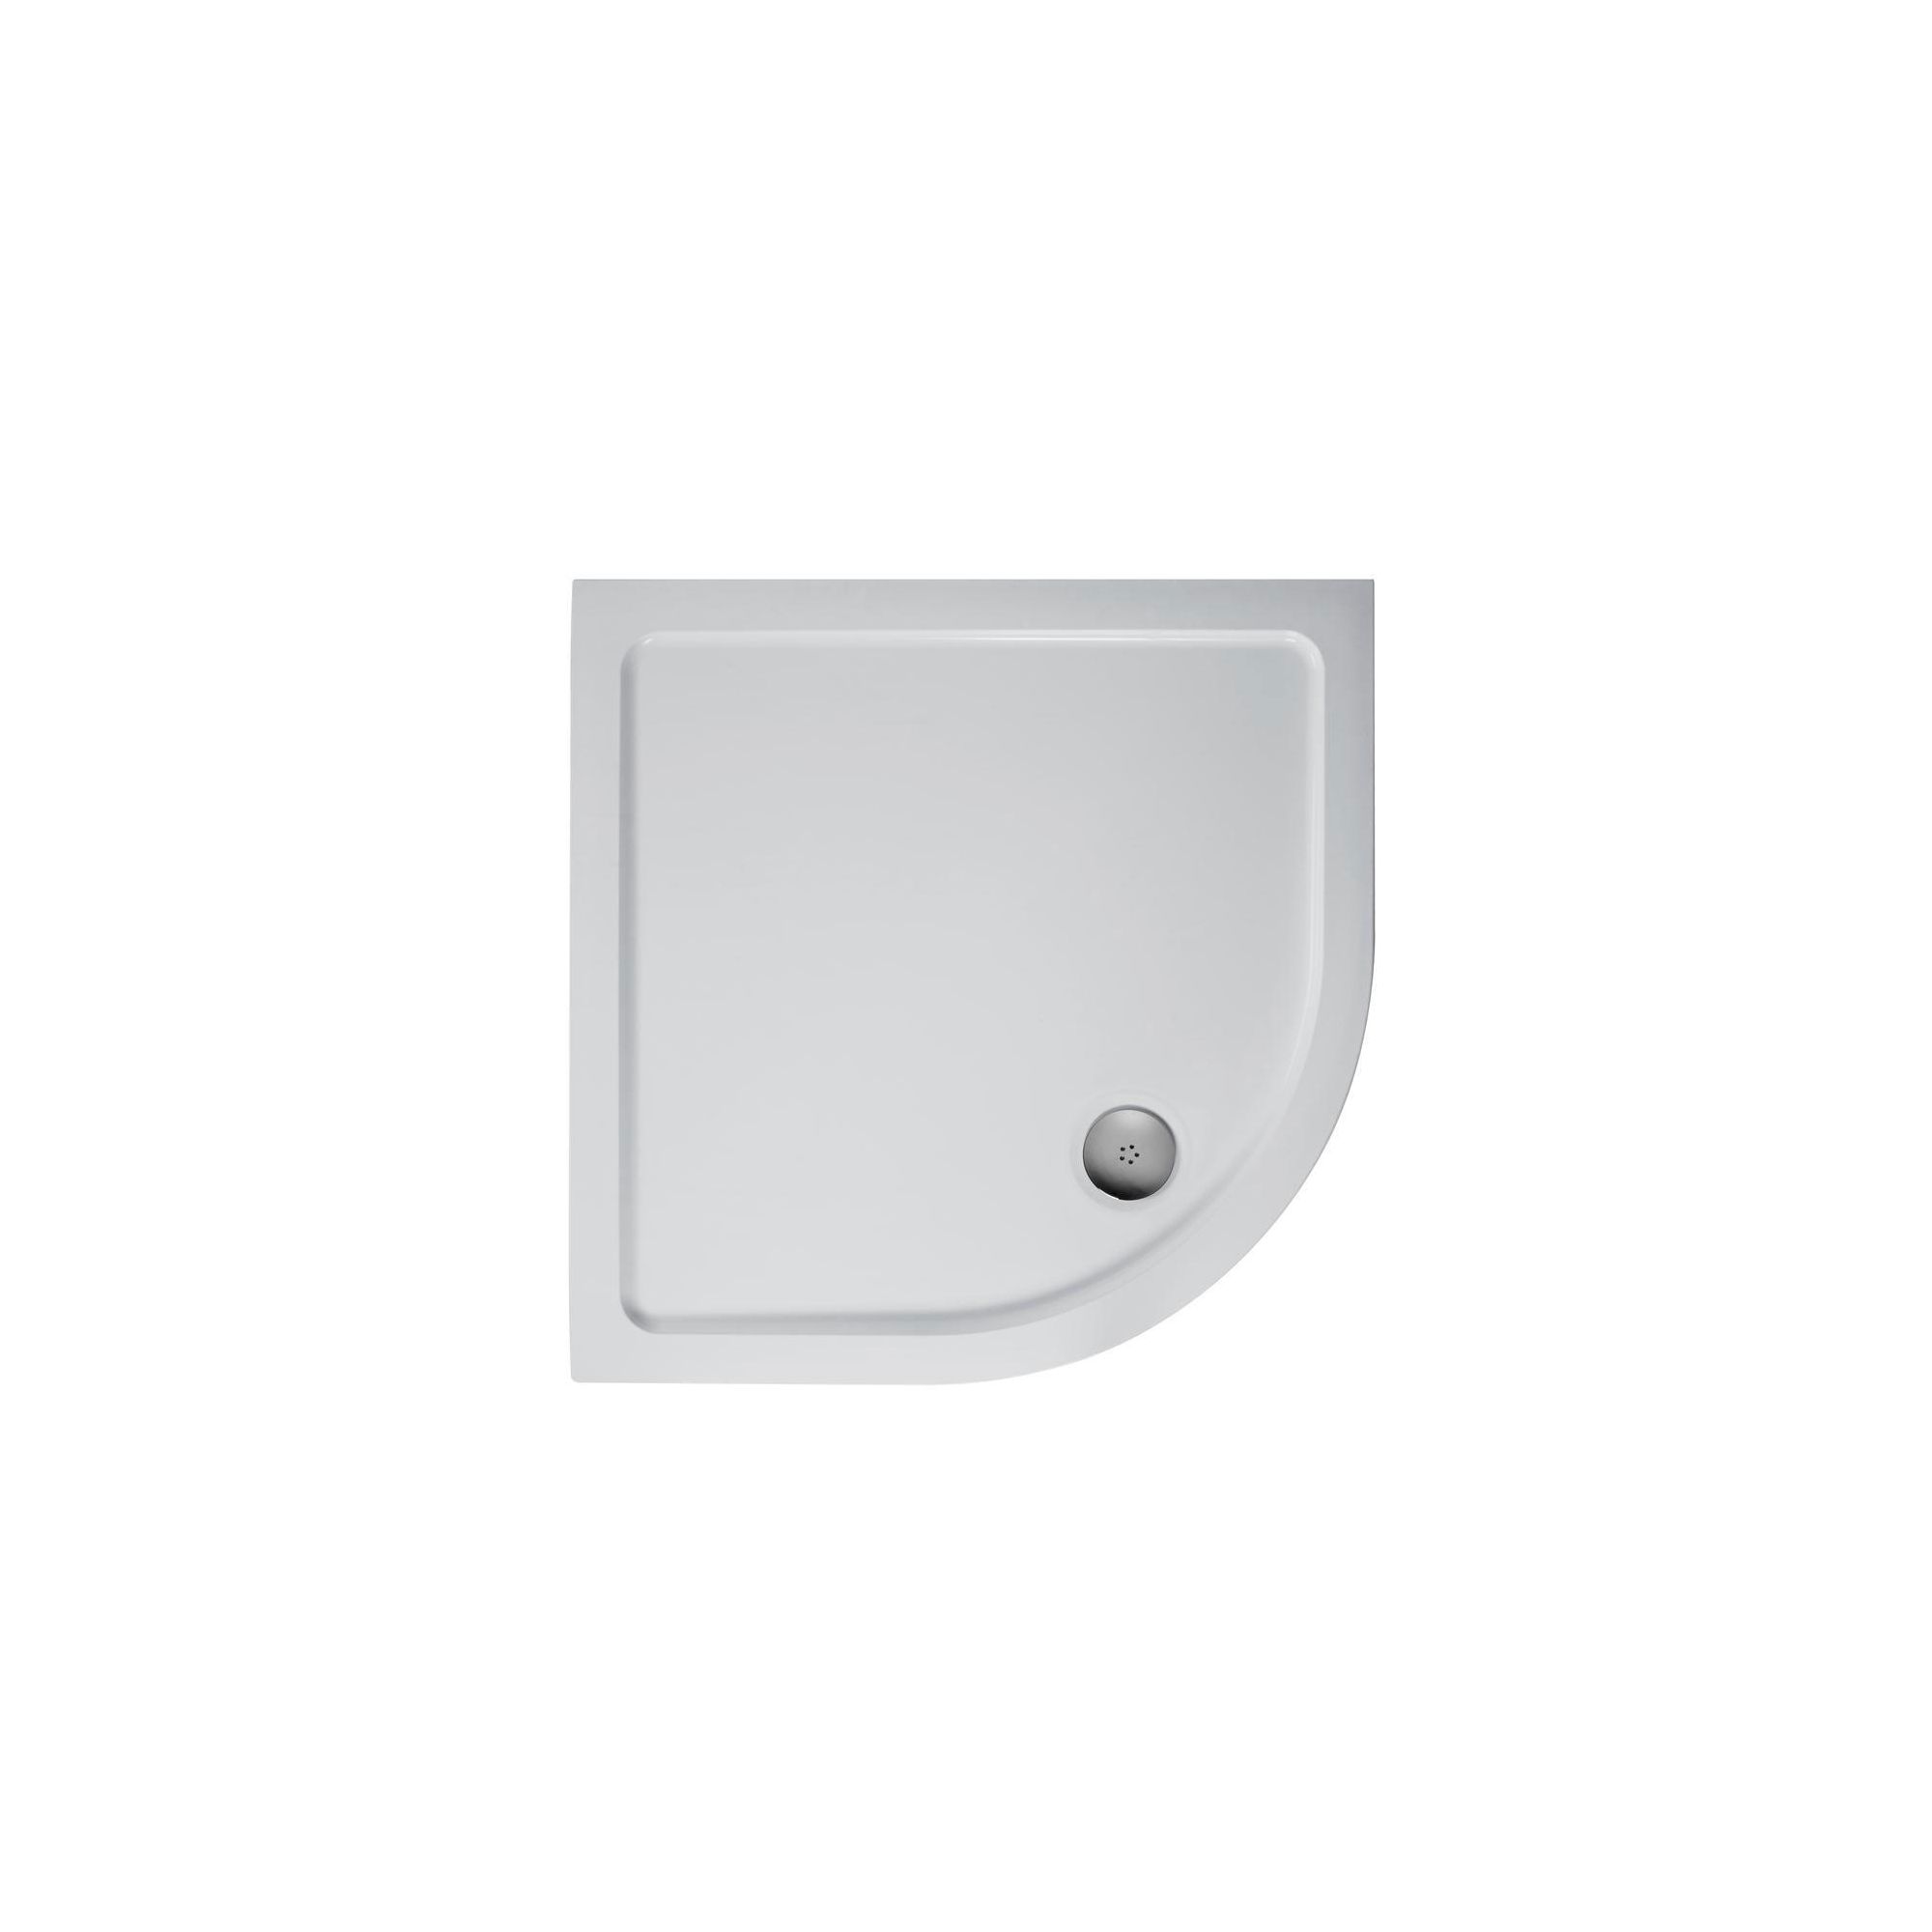 Ideal Standard Kubo Quadrant Shower Enclosure, 800mm x 800mm, Bright Silver Frame, Low Profile Tray at Tesco Direct